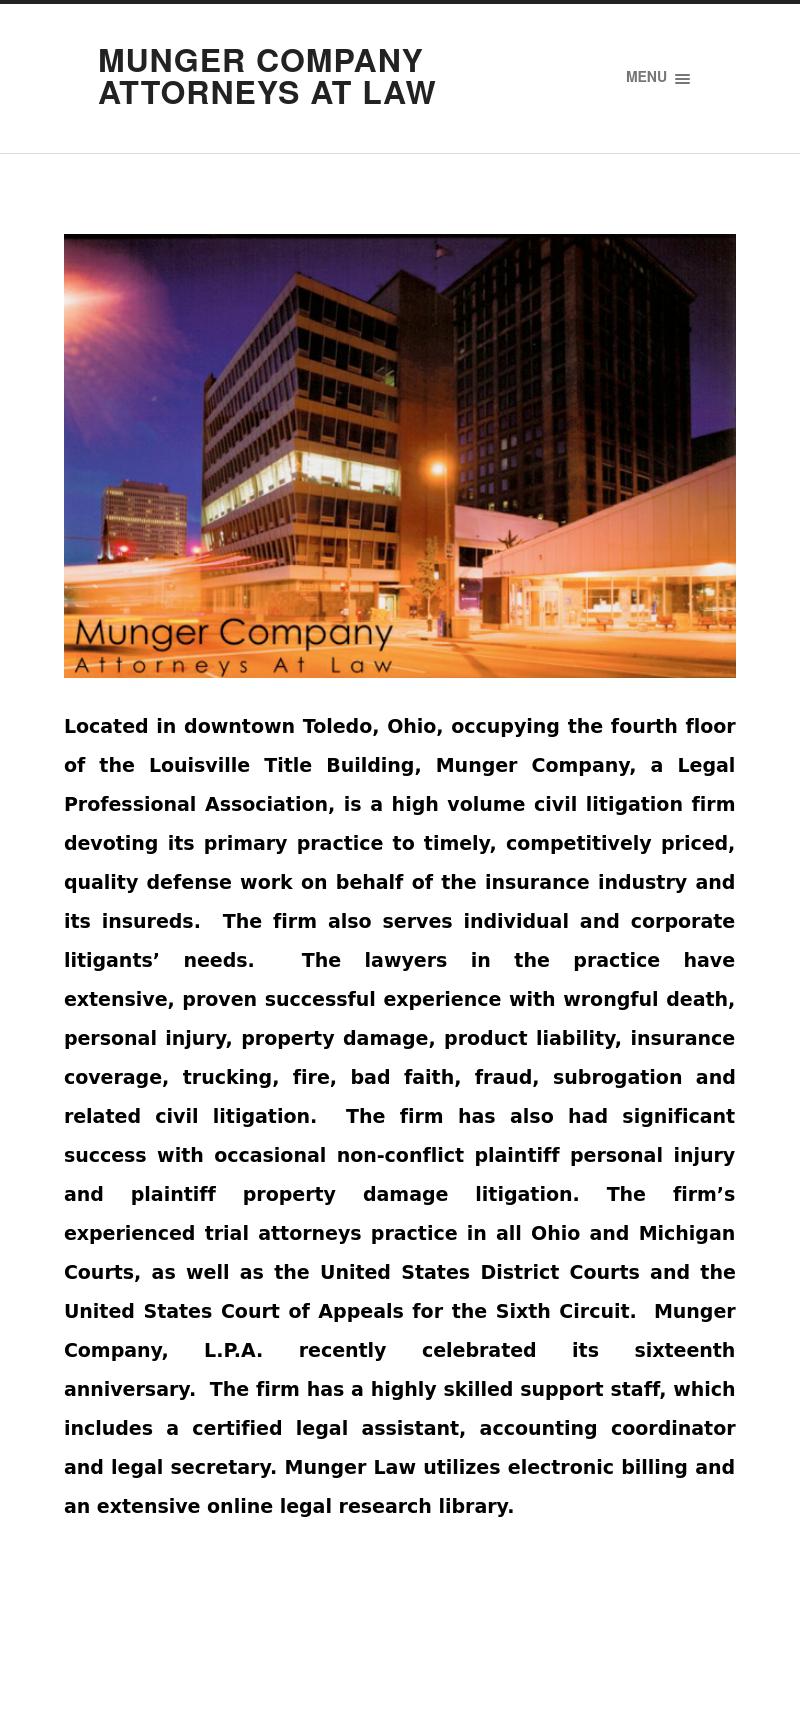 Munger Co Attorneys - Toledo OH Lawyers